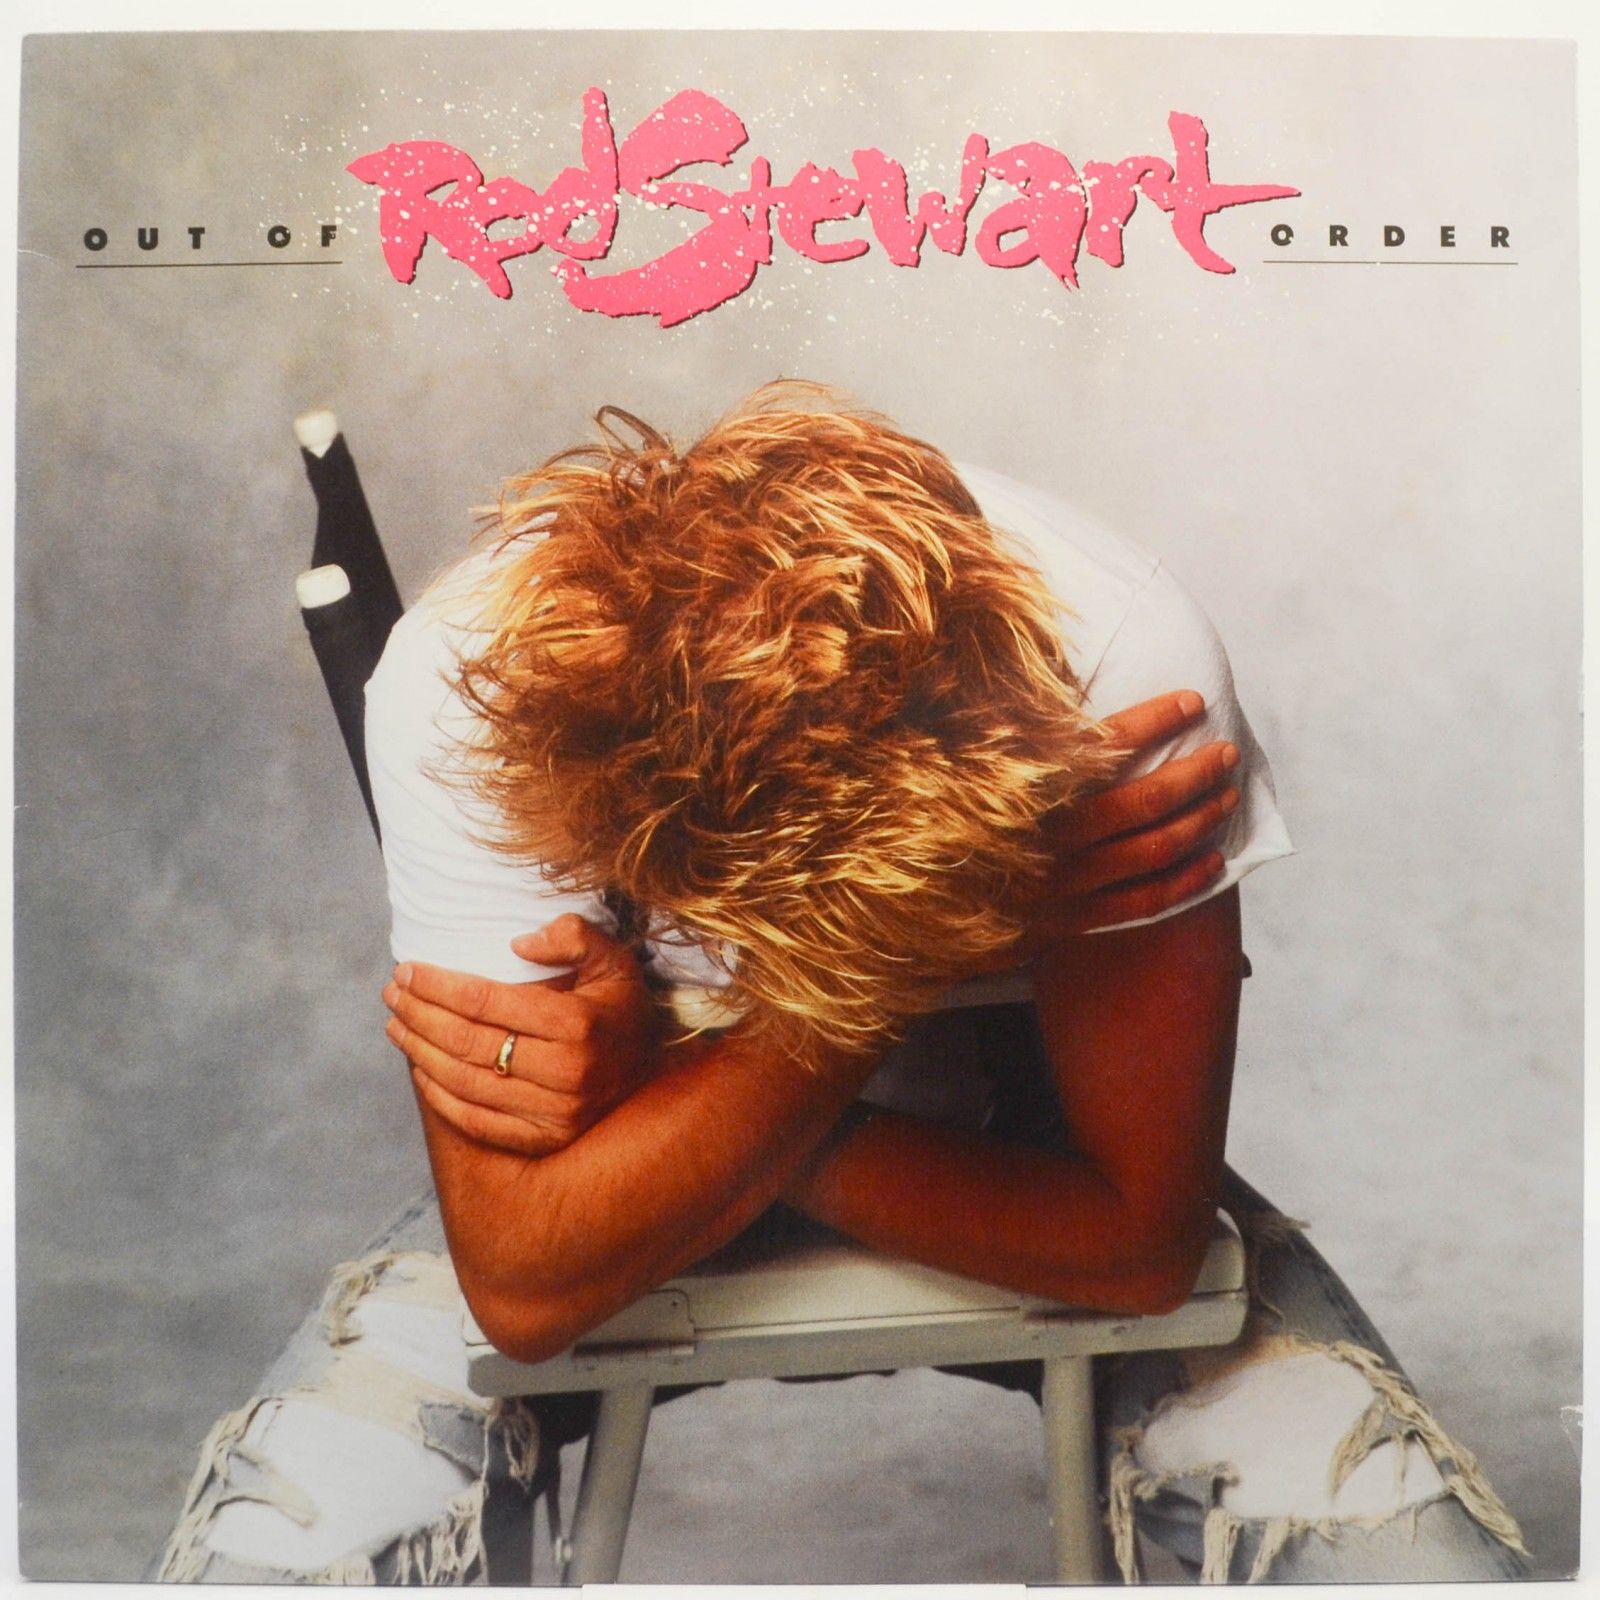 Rod Stewart — Out Of Order, 1988